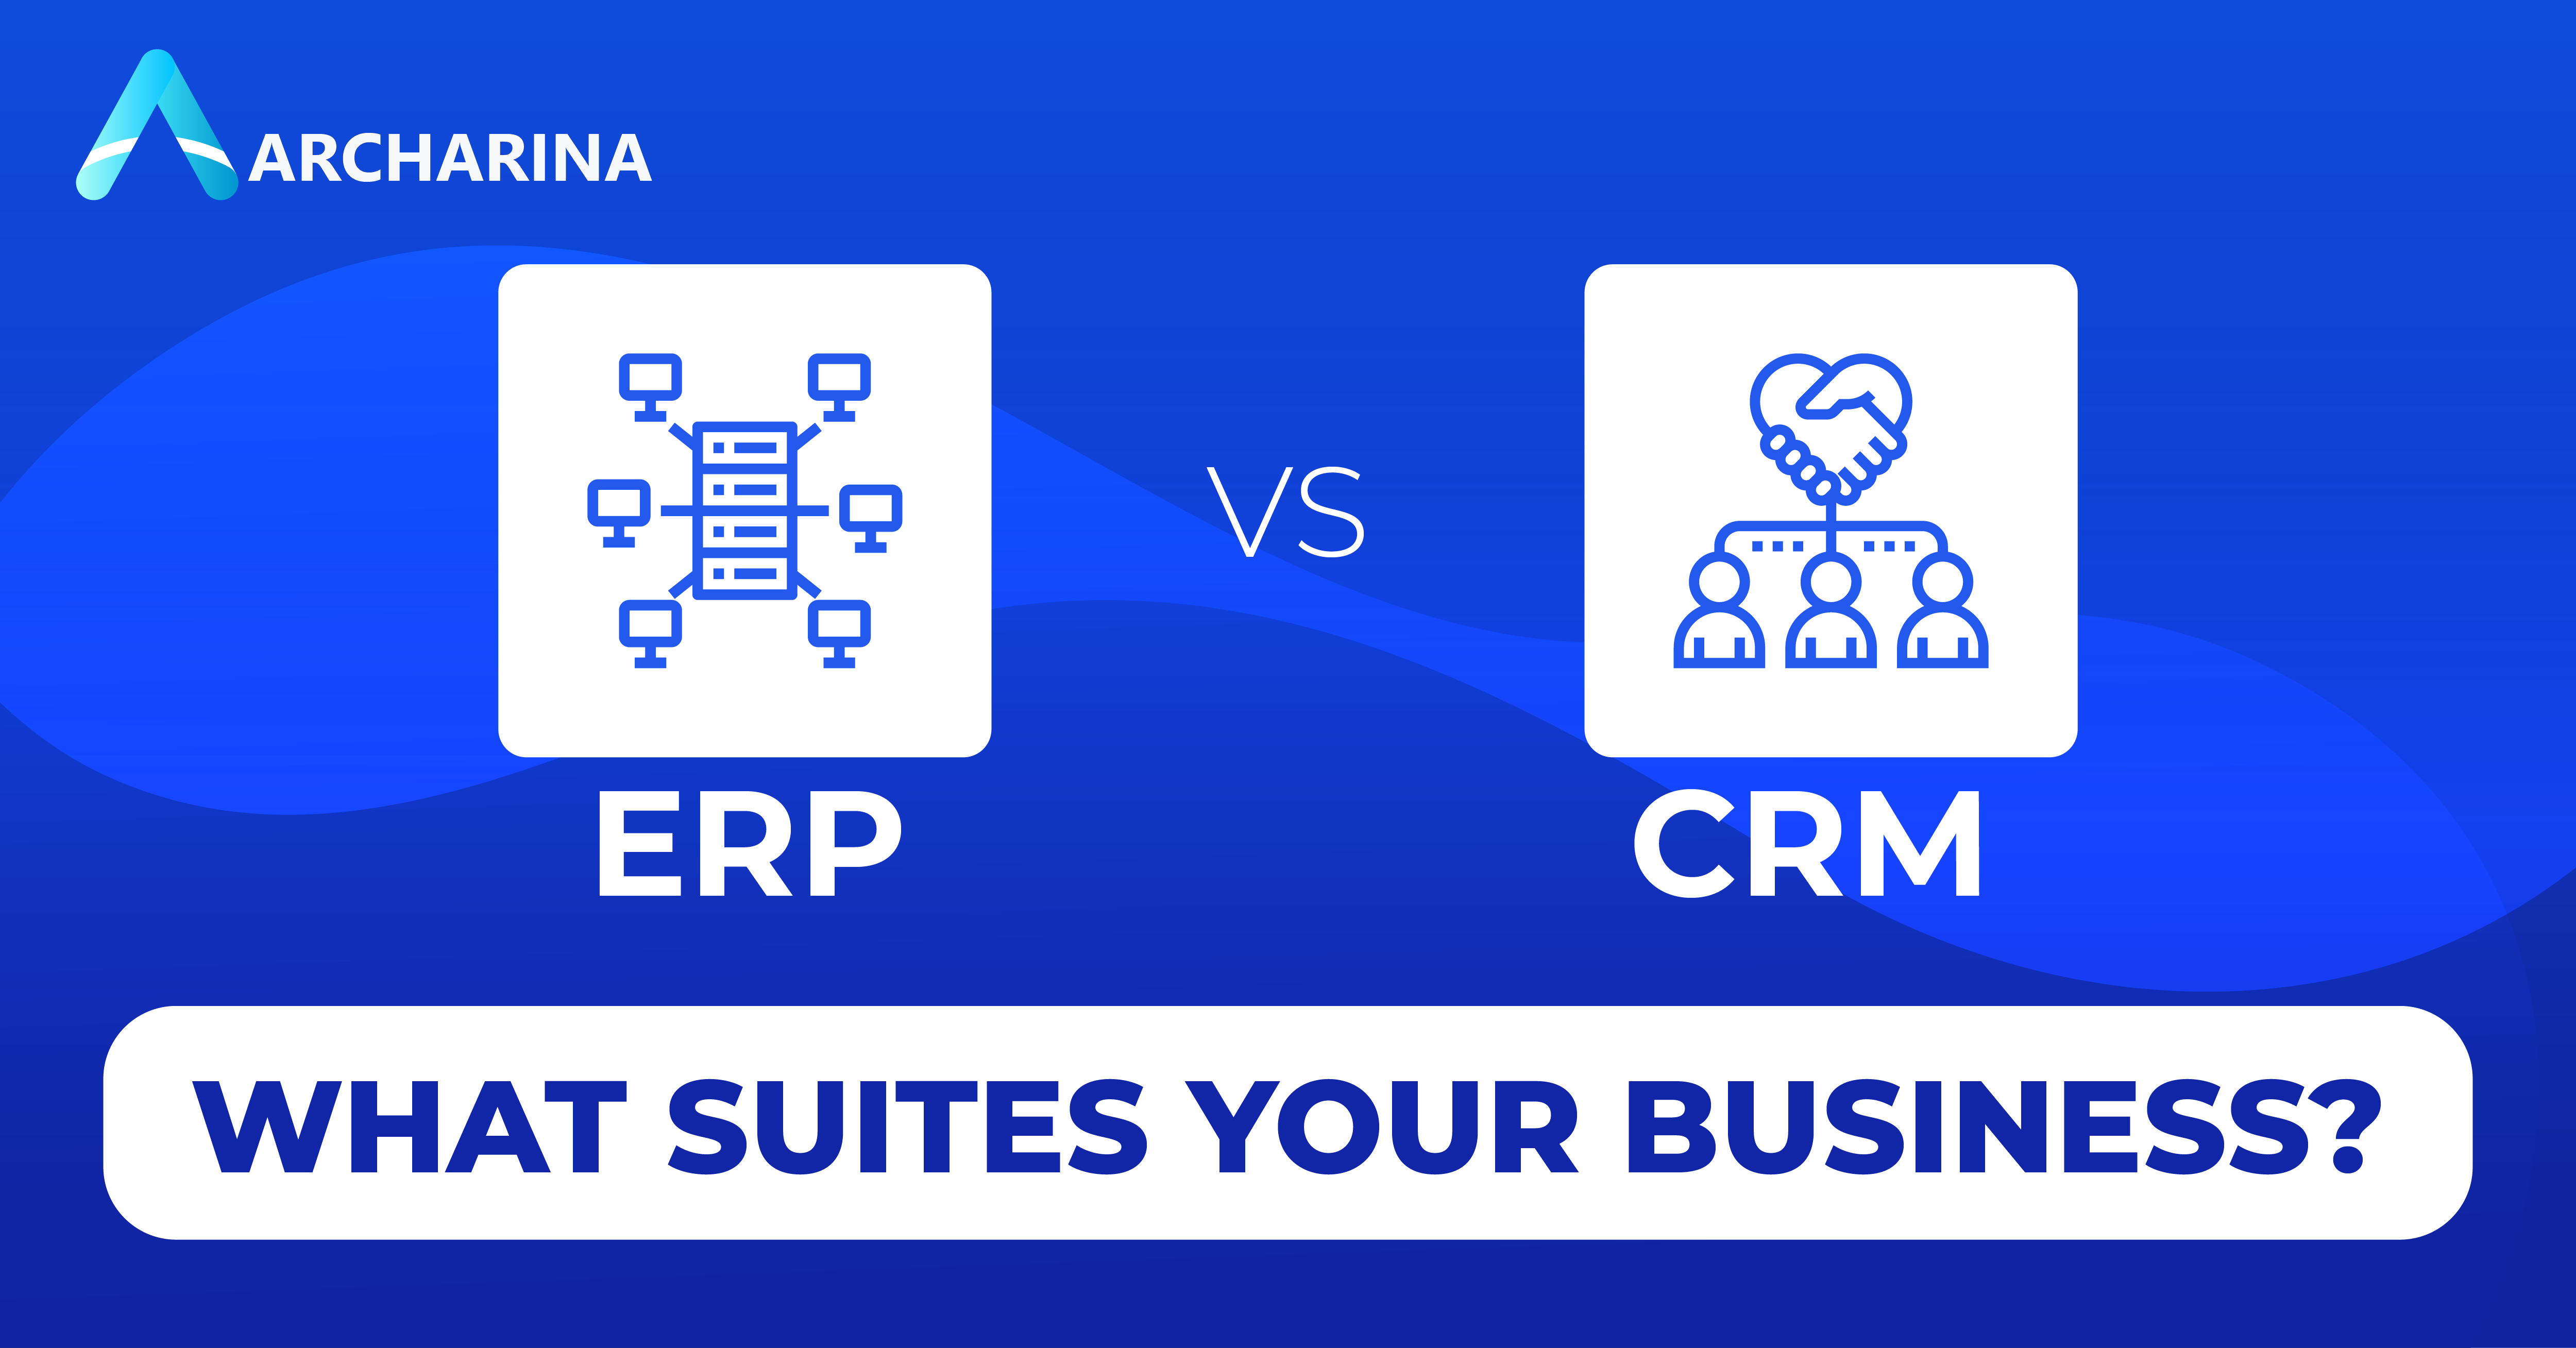 crm-vs-erp-what-suites-your-business